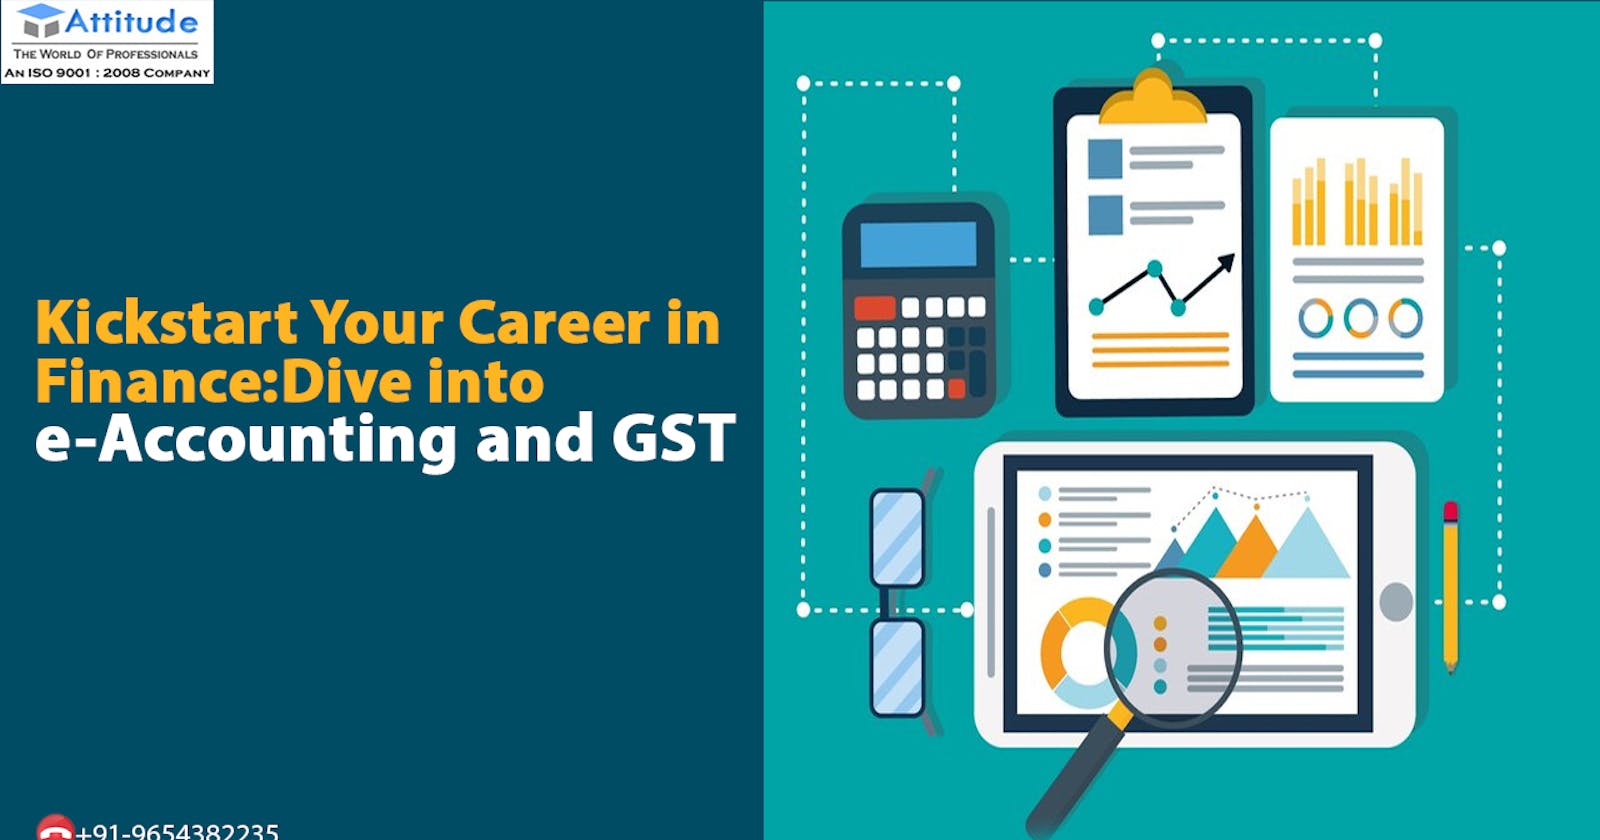 Kickstart Your Career in Finance: Dive into e-Accounting and GST